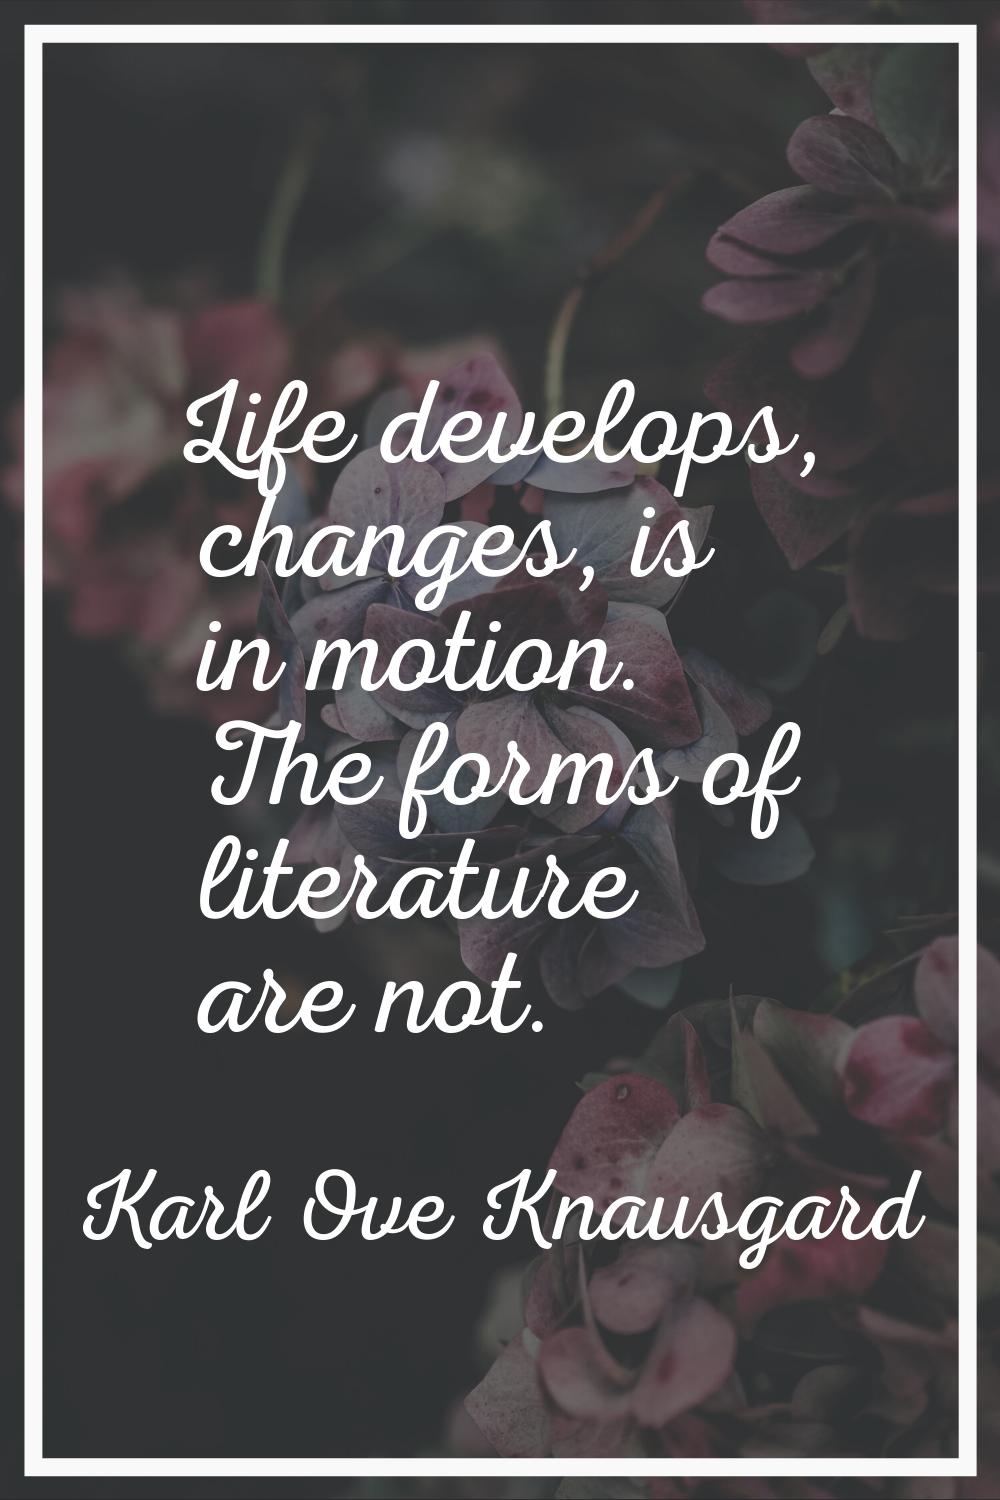 Life develops, changes, is in motion. The forms of literature are not.